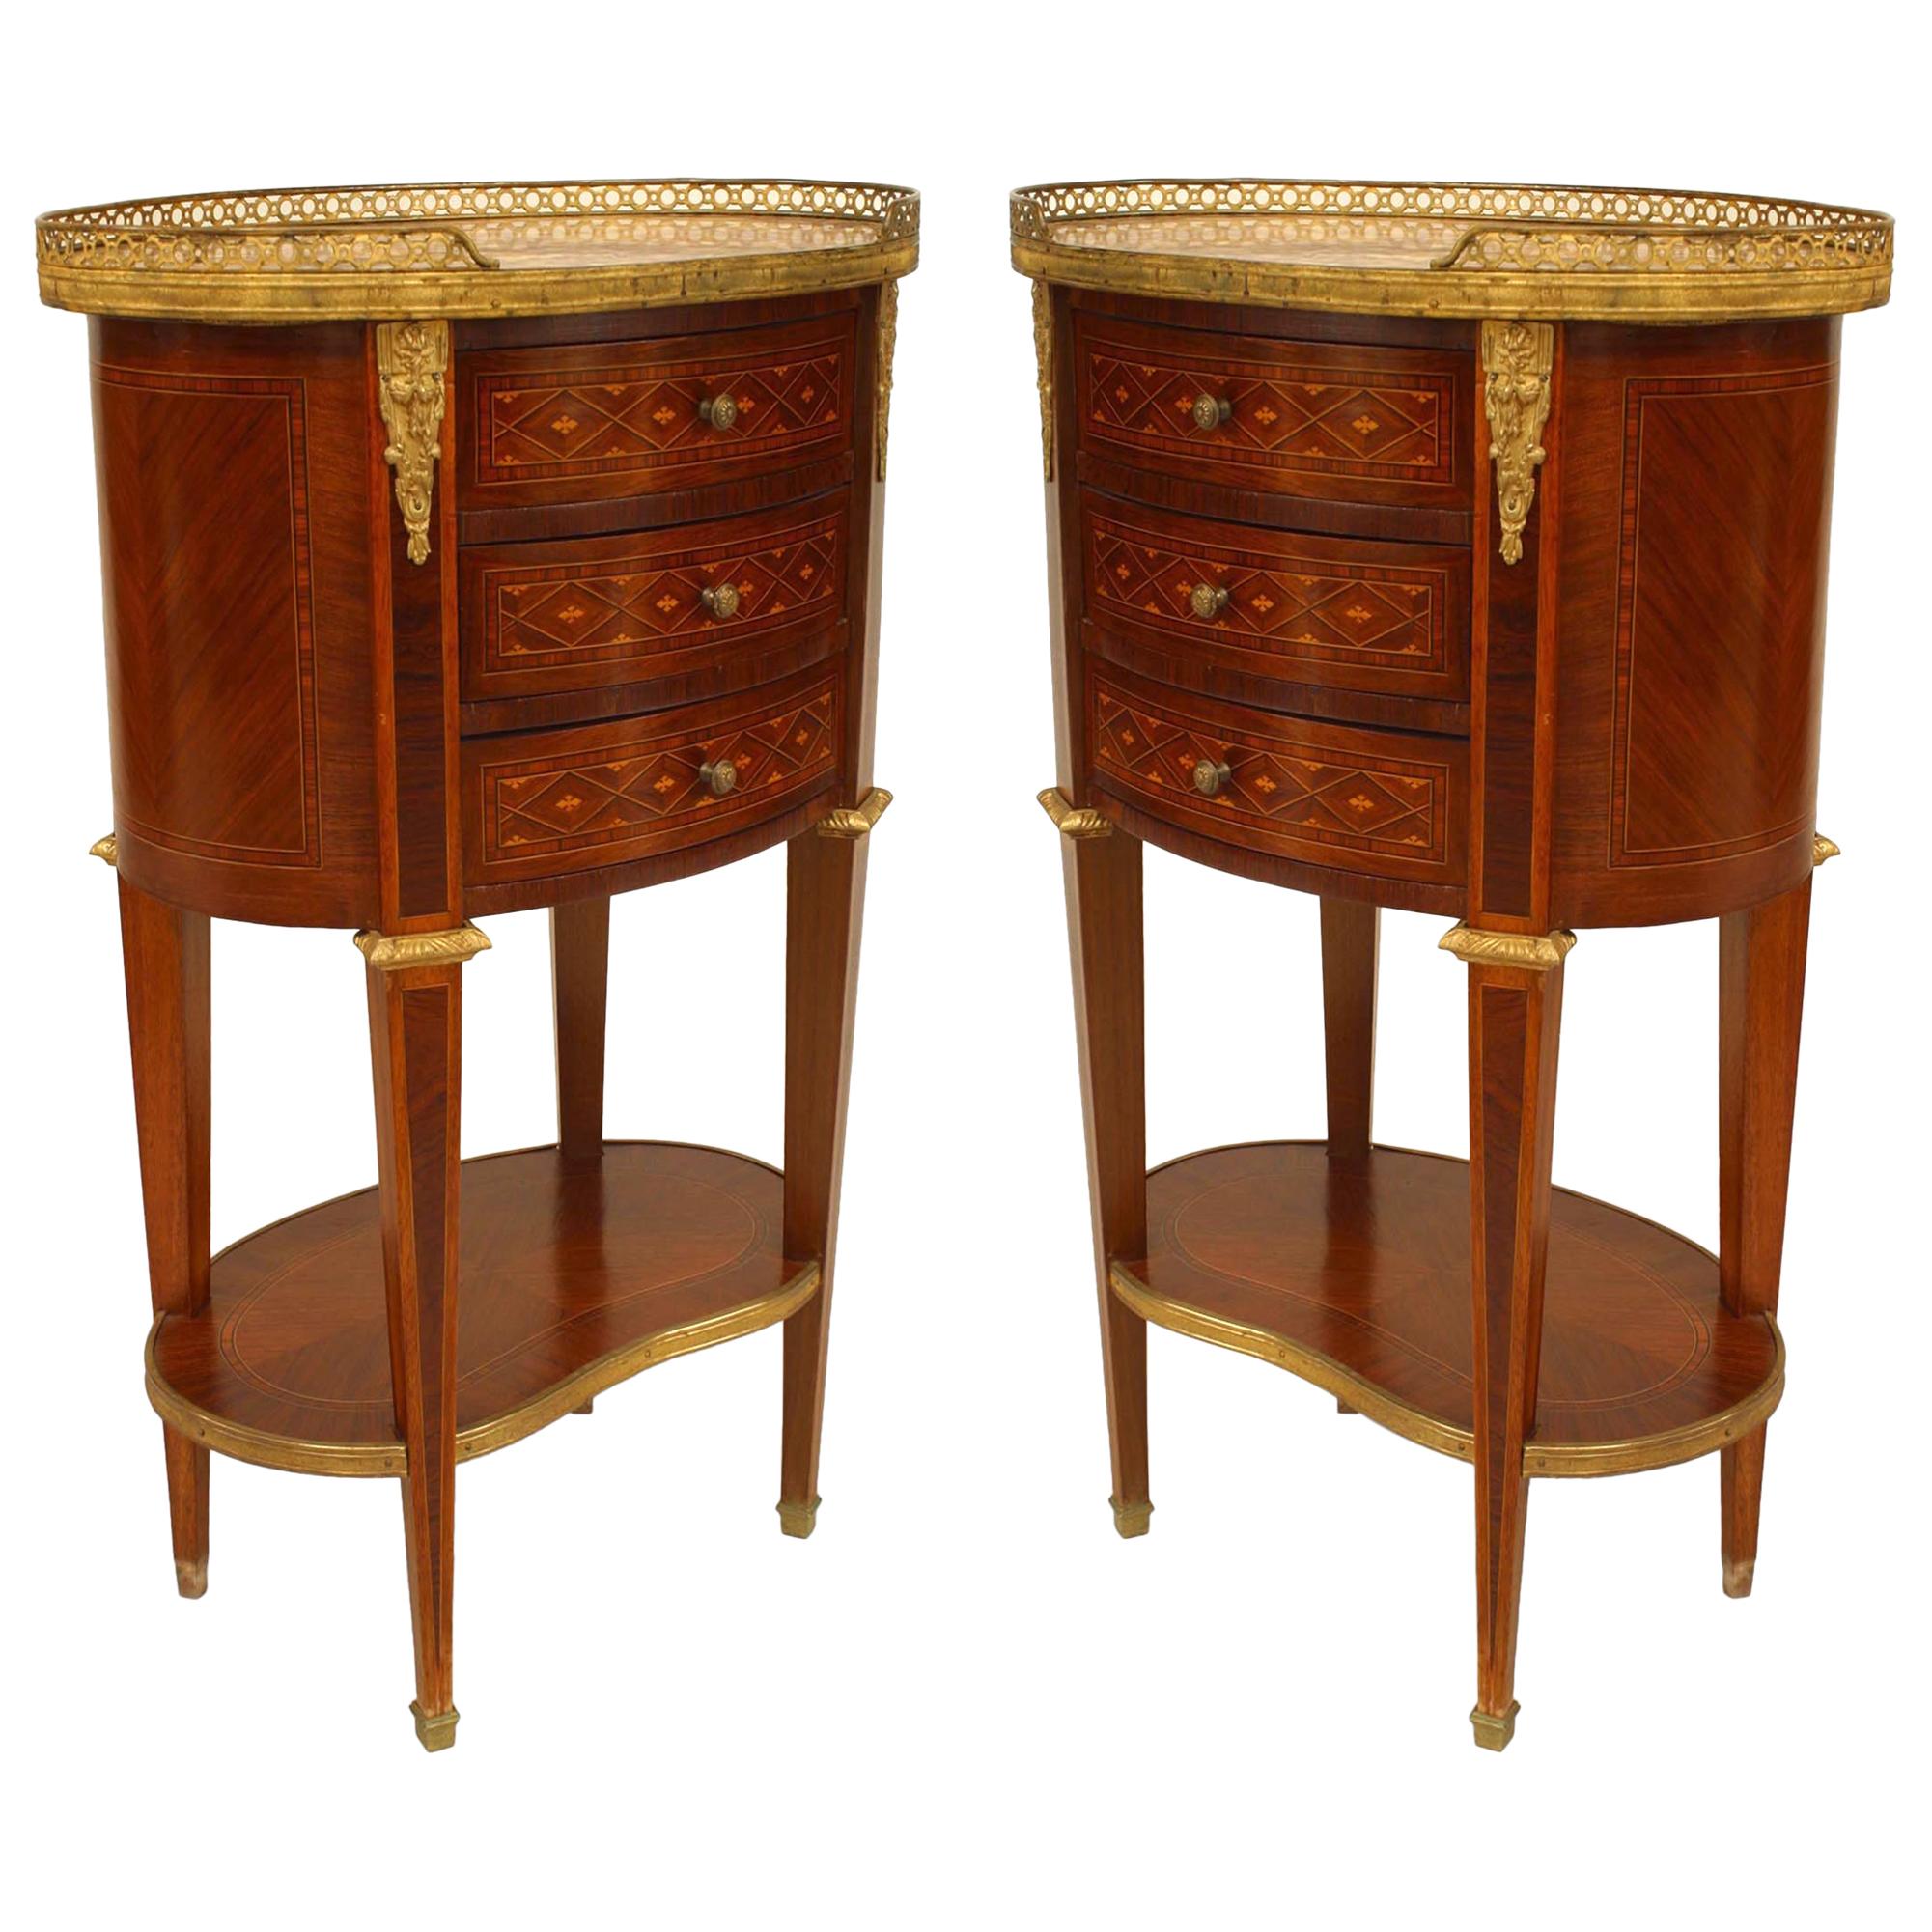 Pair of French Louis XVI Style Parquetry Design Bedside Commodes